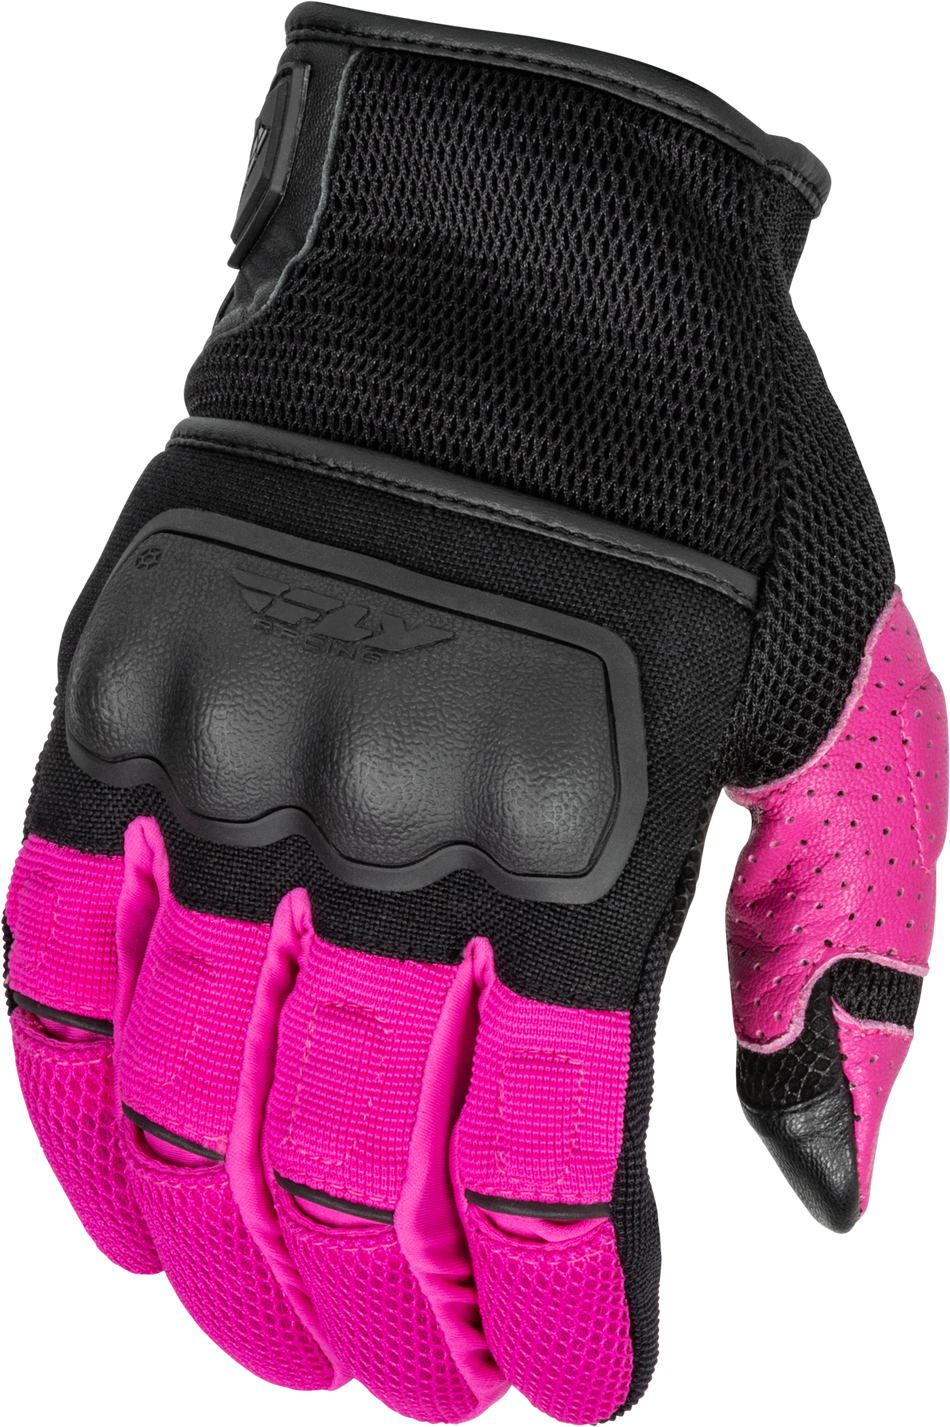 FLY RACING Women's Coolpro Force Gloves Black/Pink 2x 476-63022X